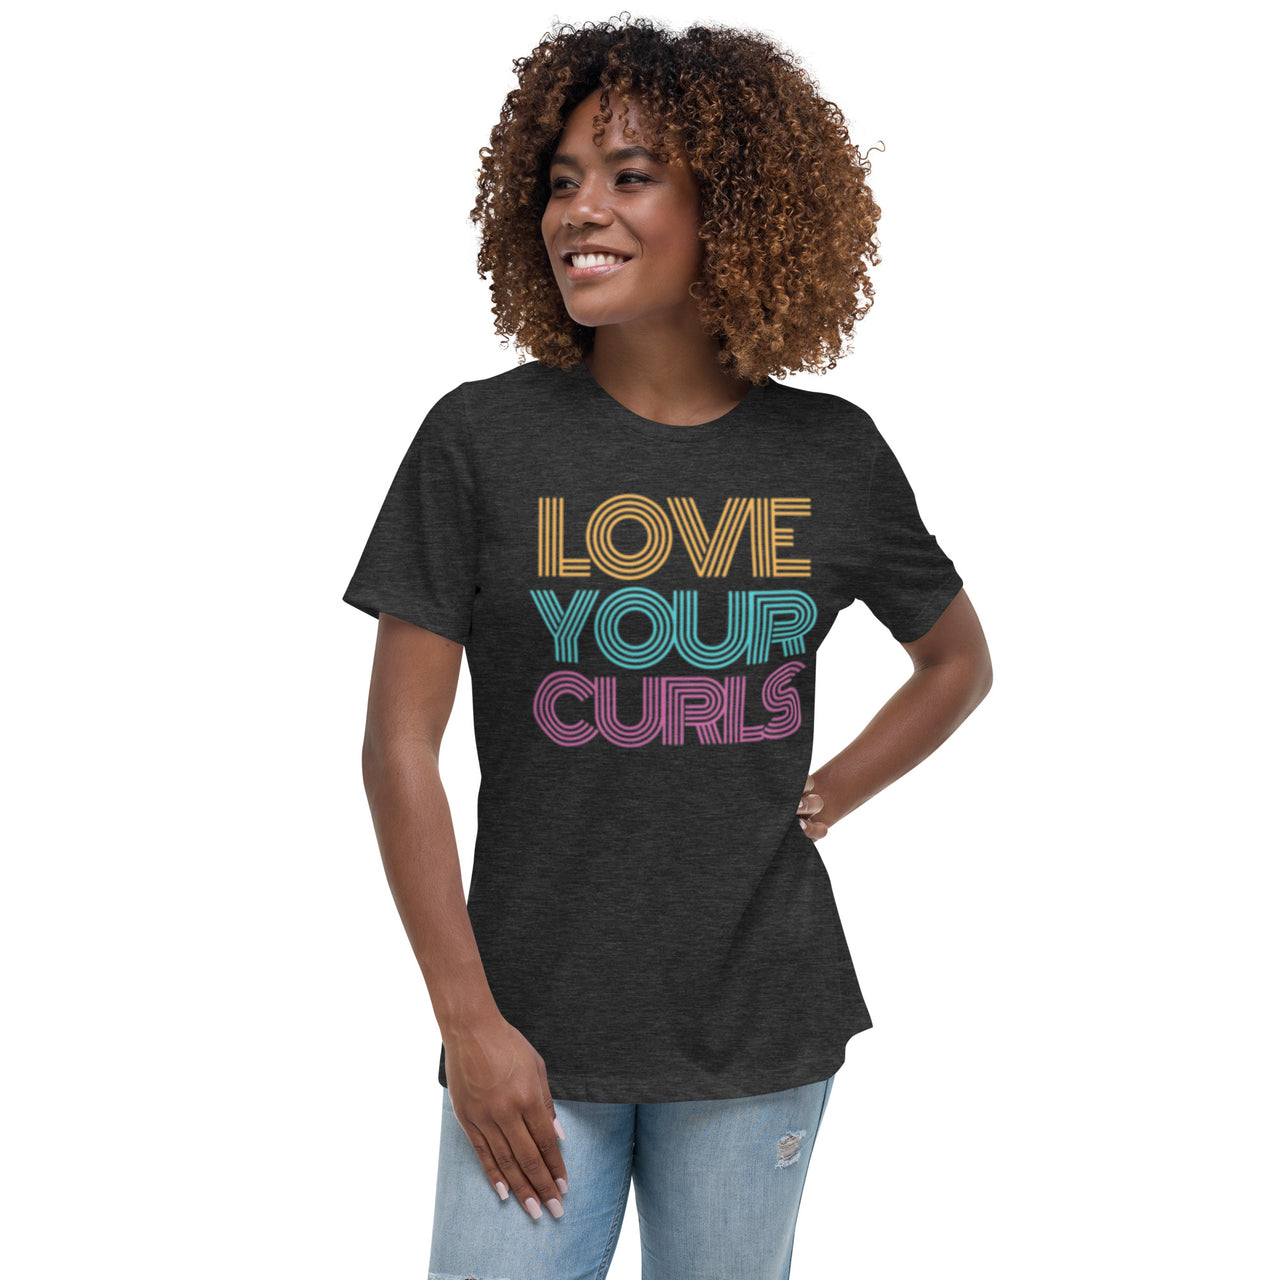 Love Your Curls - T-Shirt